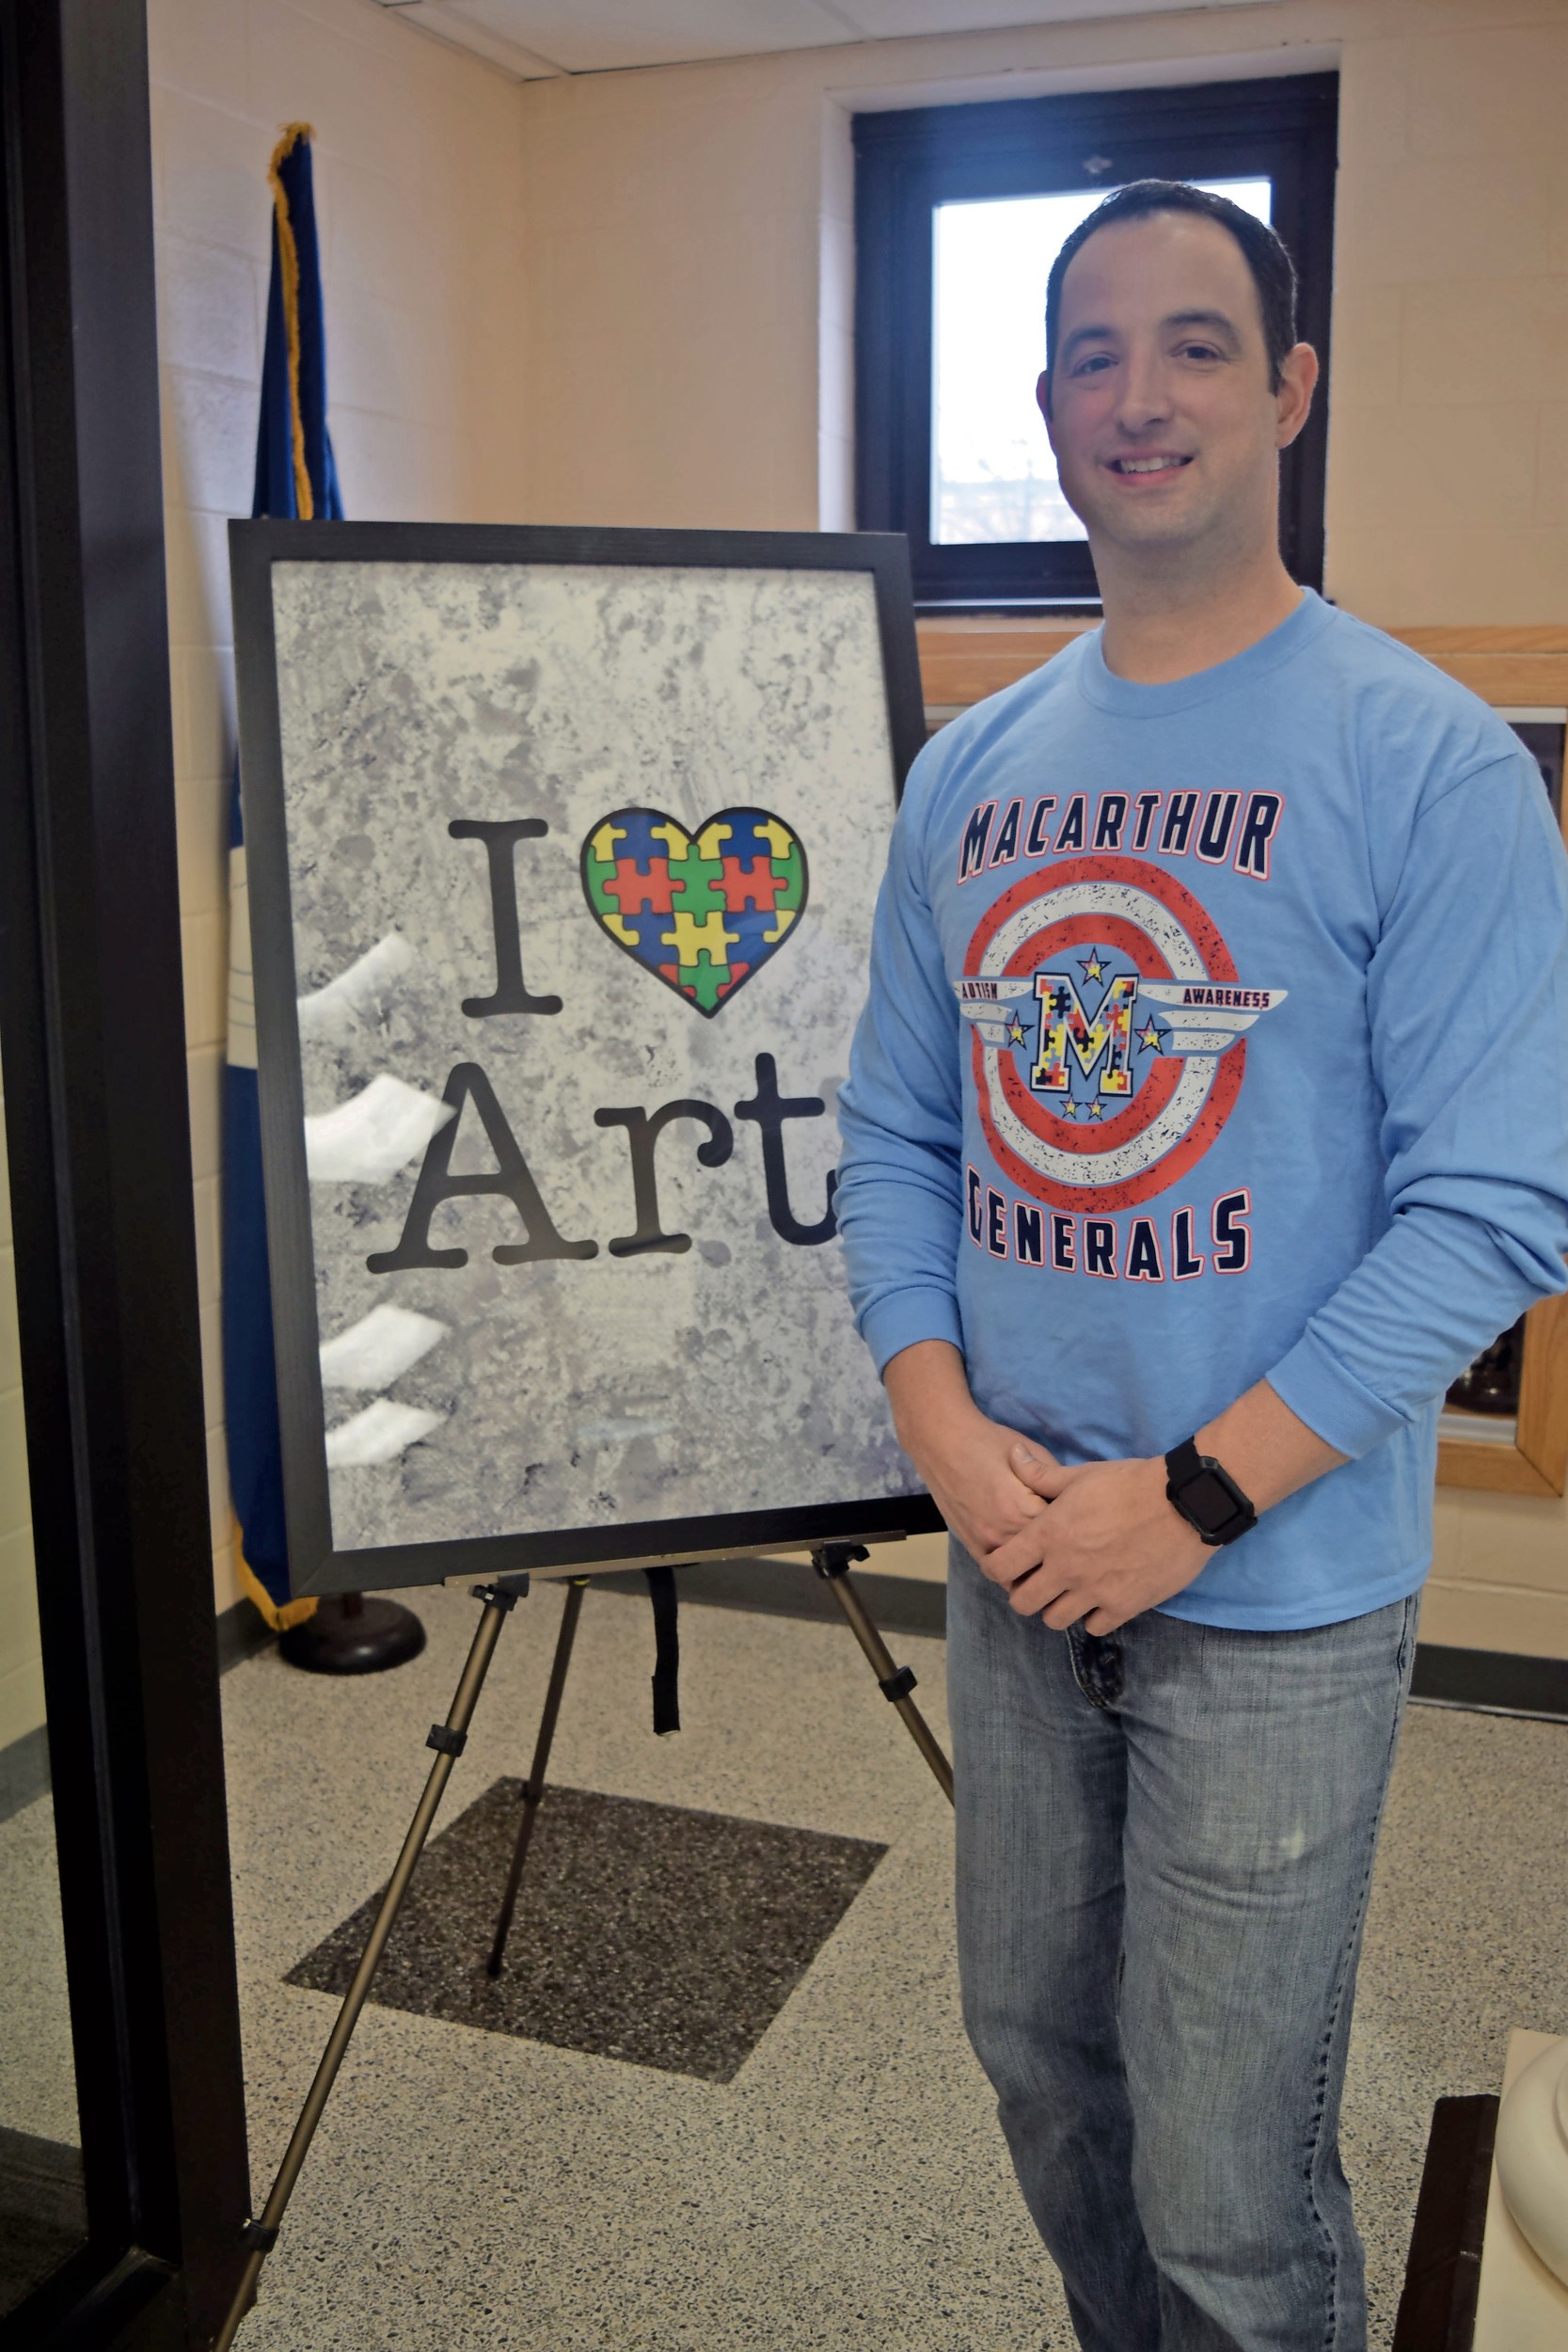 Vincent Causeman, a MacArthur High School social studies teacher, spearheads projects and events to raise awareness of autism and similar disorders in the high school and community.